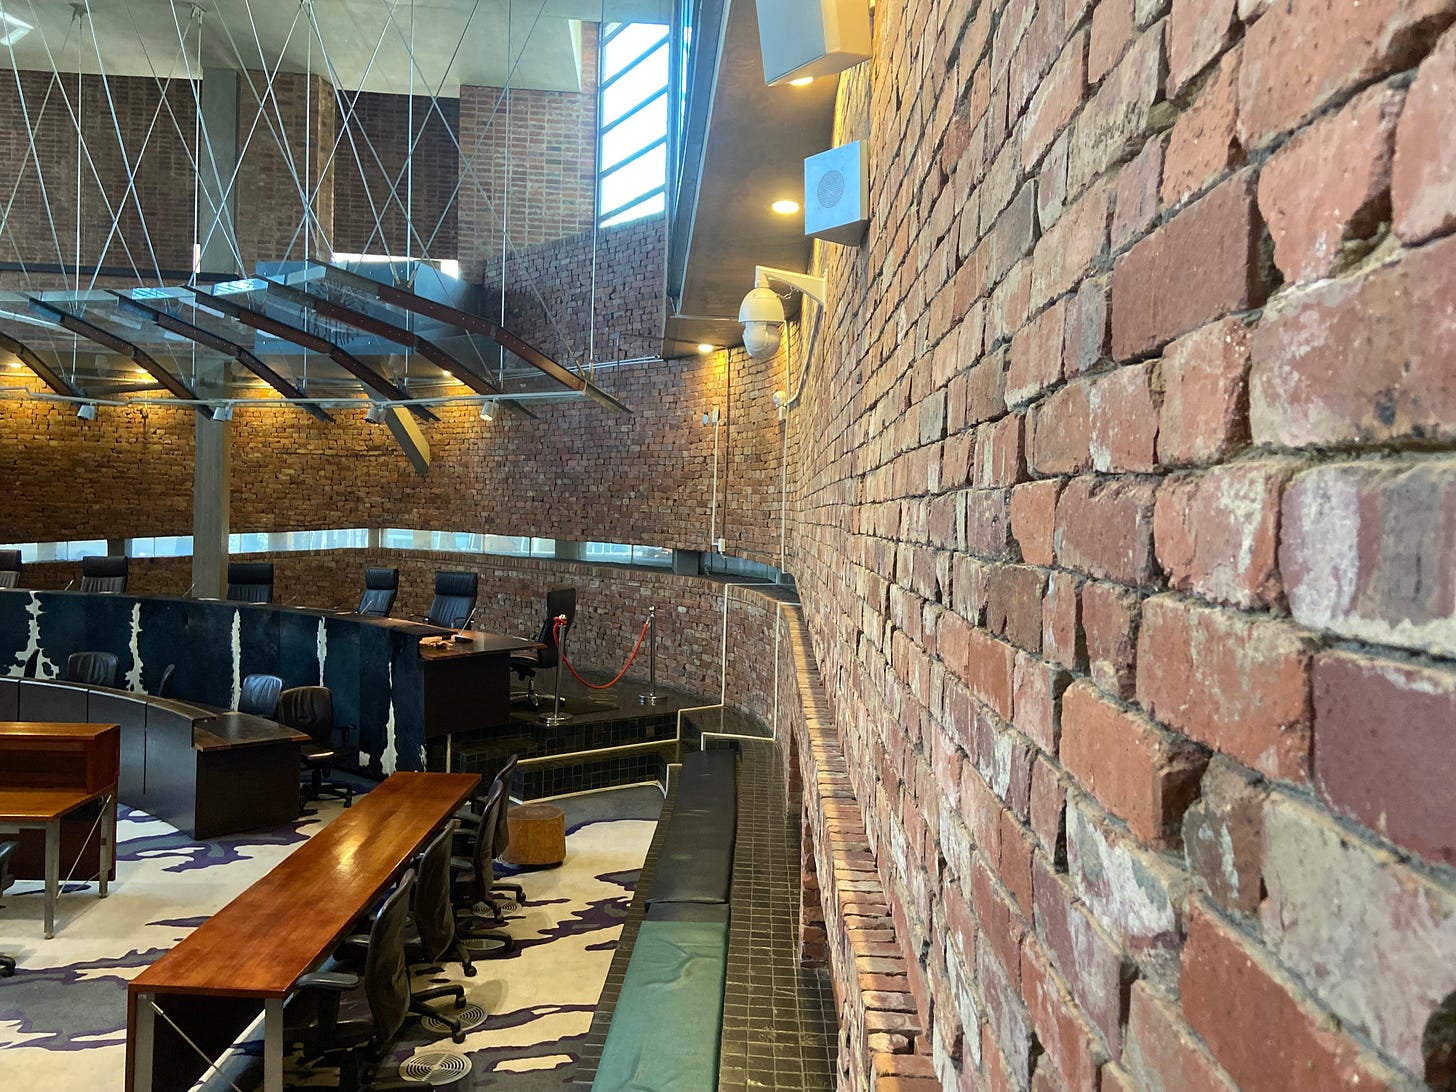 South African Constitutional Court chambers. Walls constructed with bricks from old prison. Eye-level window that shows only the feet of people walking by on the sidewalk. Author photograph. July 2, 2022.